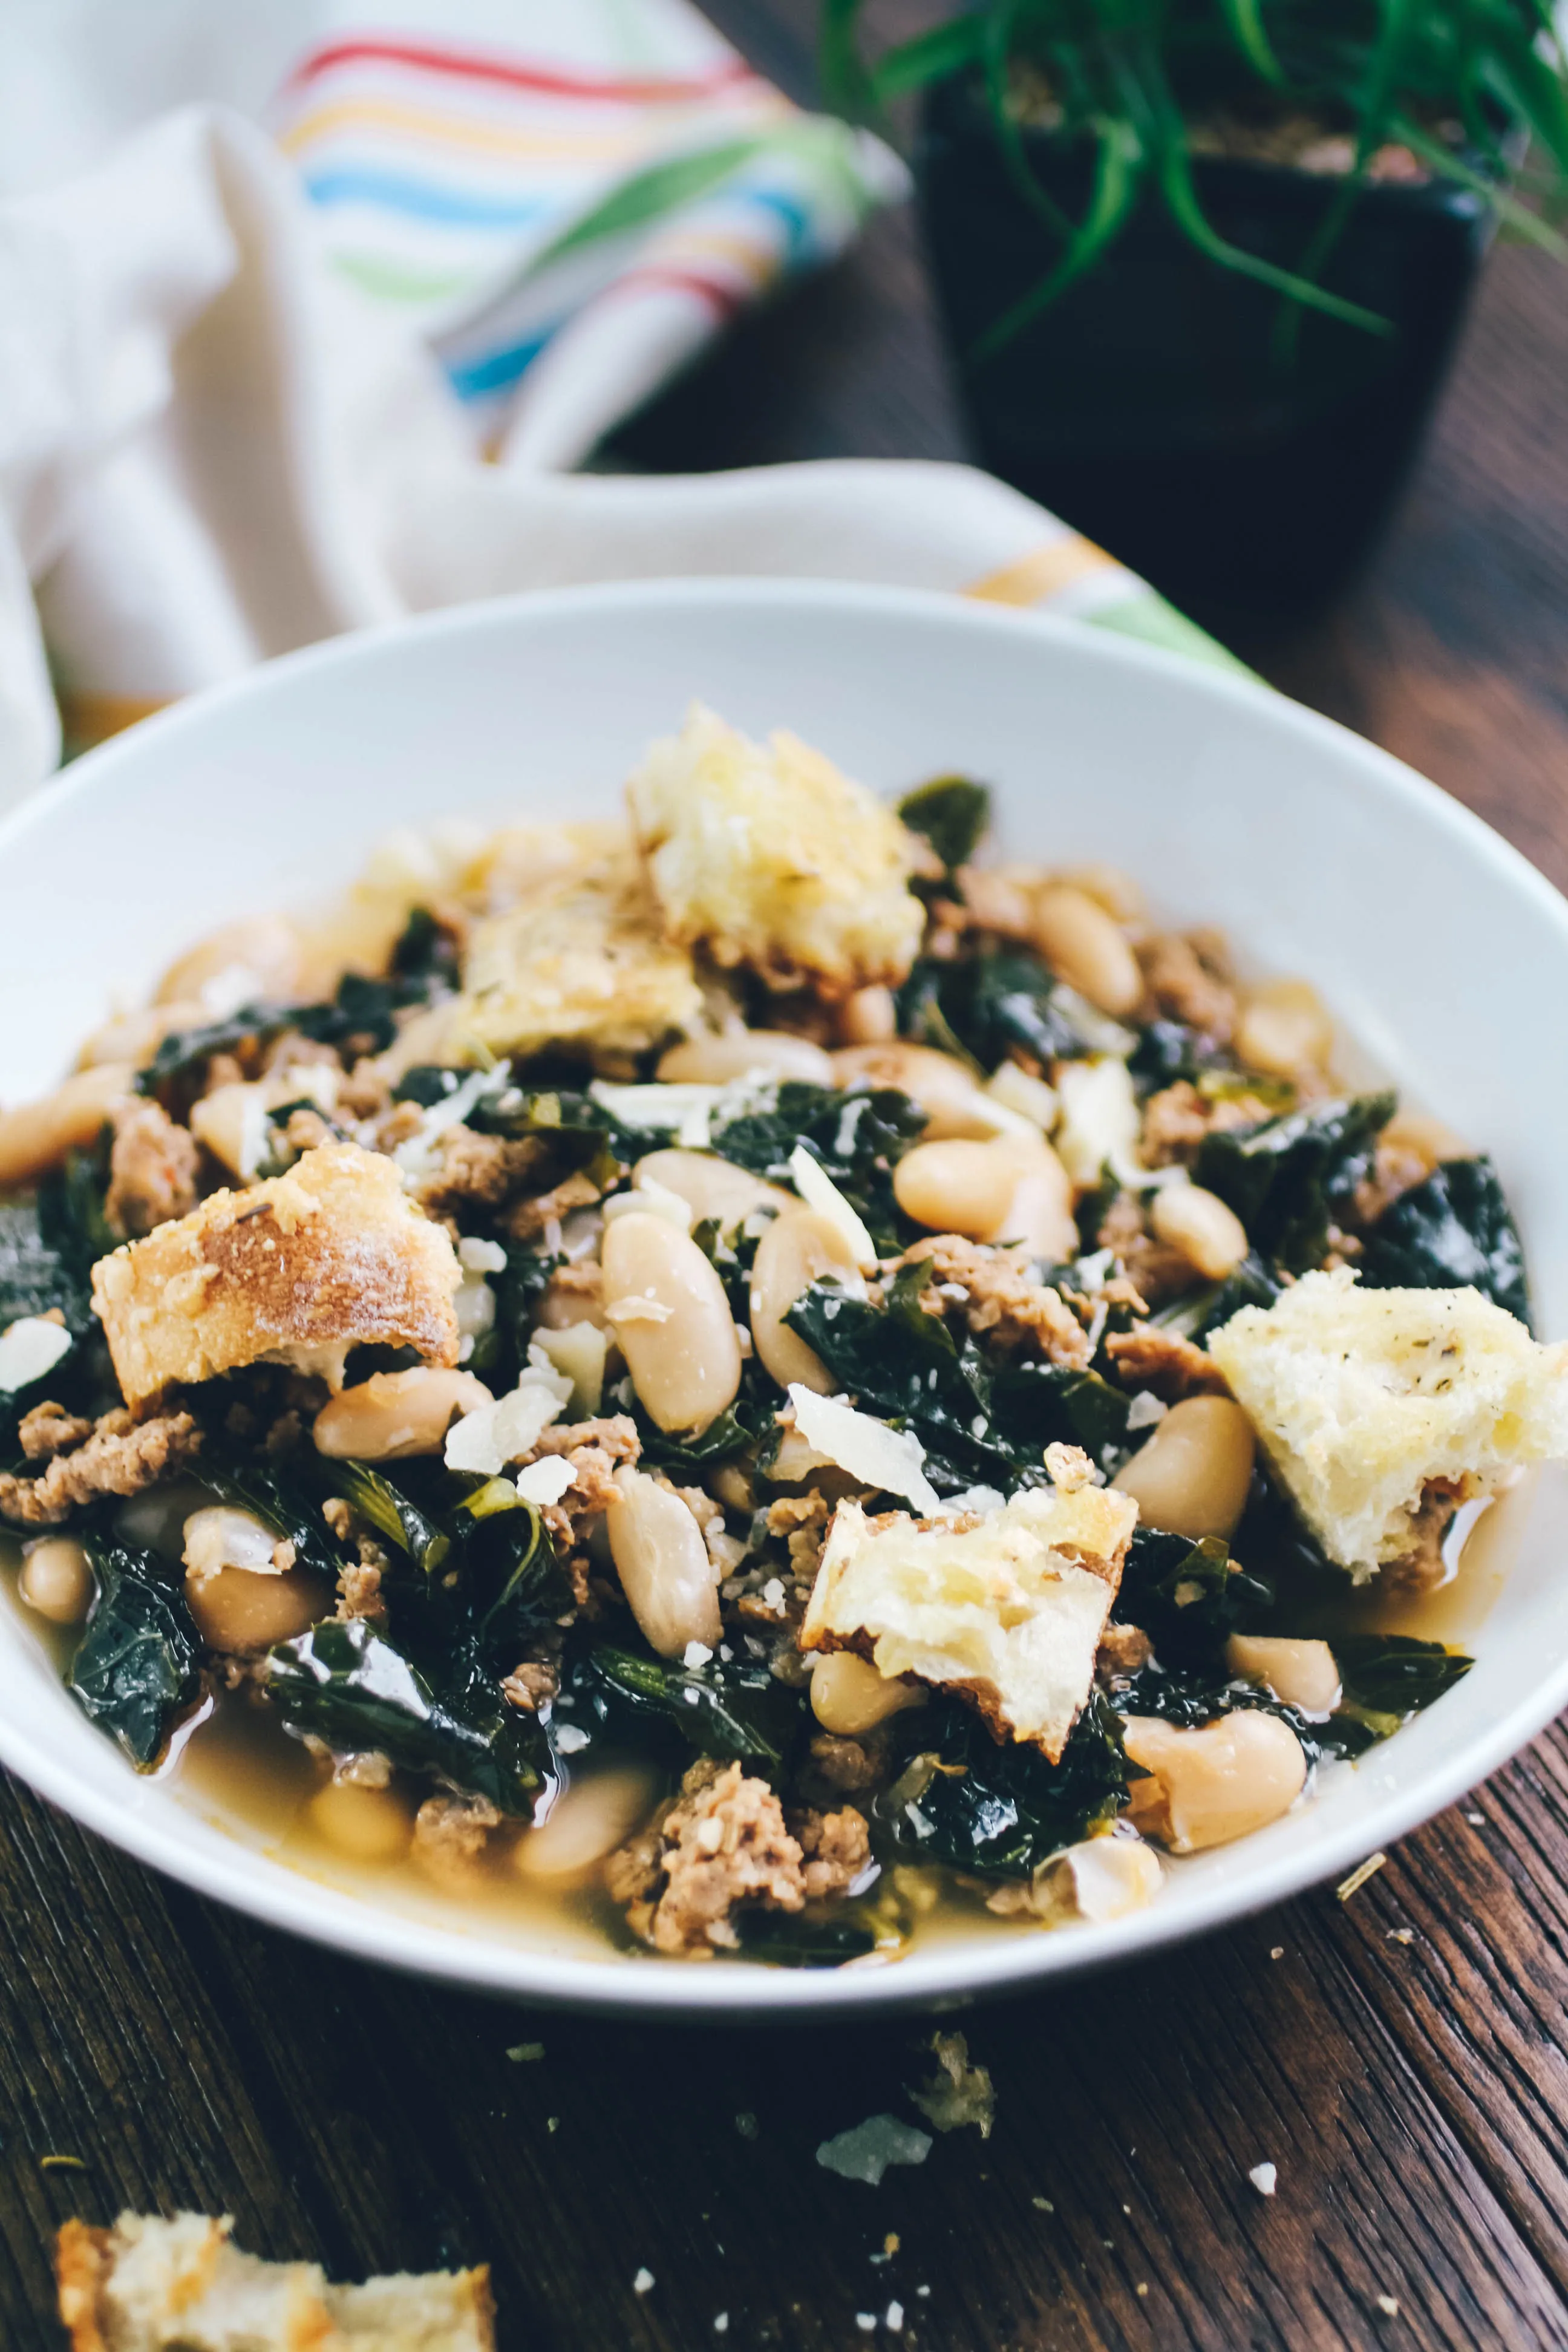 Sausage, Kale, and White Bean Soup with Rosemary-Parmesan Croutons is an easy and filling dish. You'll love Sausage, Kale, and White Bean Soup with Rosemary-Parmesan Croutons any night of the week!